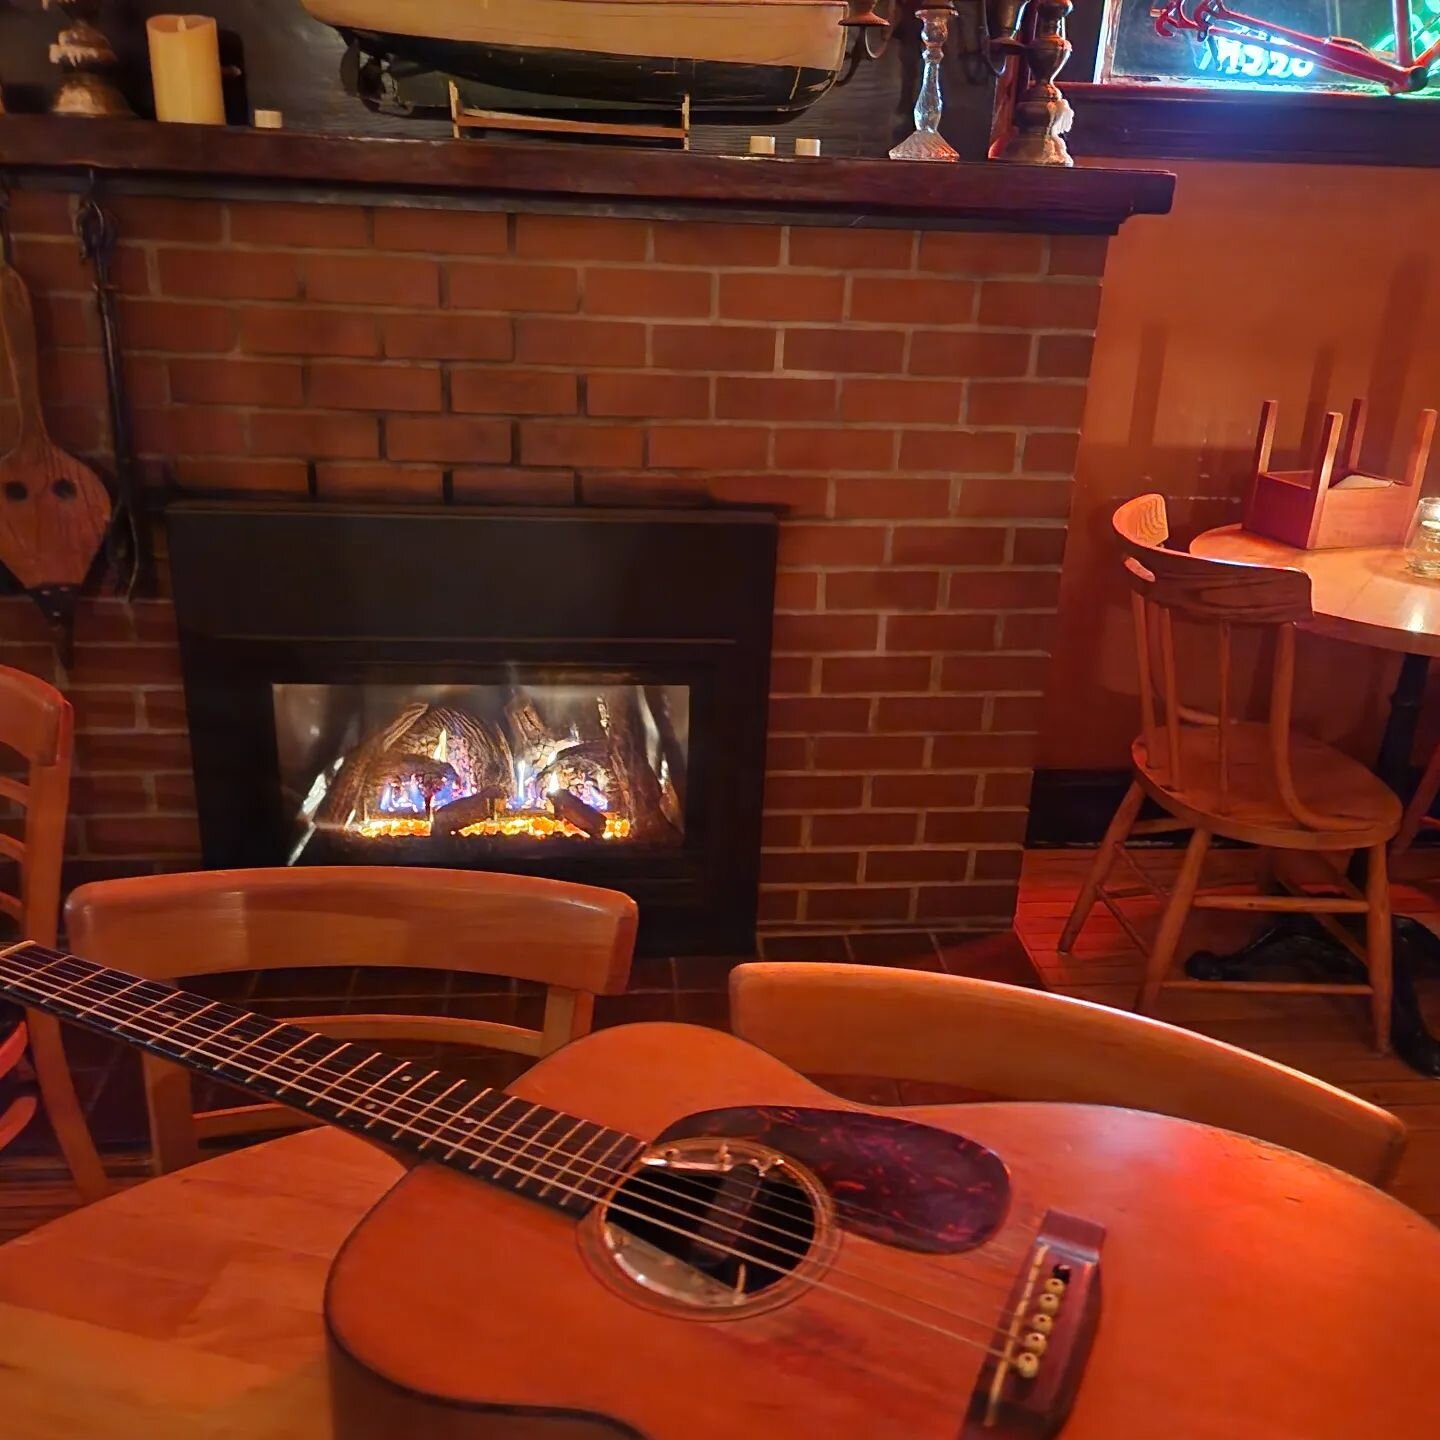 Keep warm with music and friends by the tonight at the Muddy Rudder 8-10pm